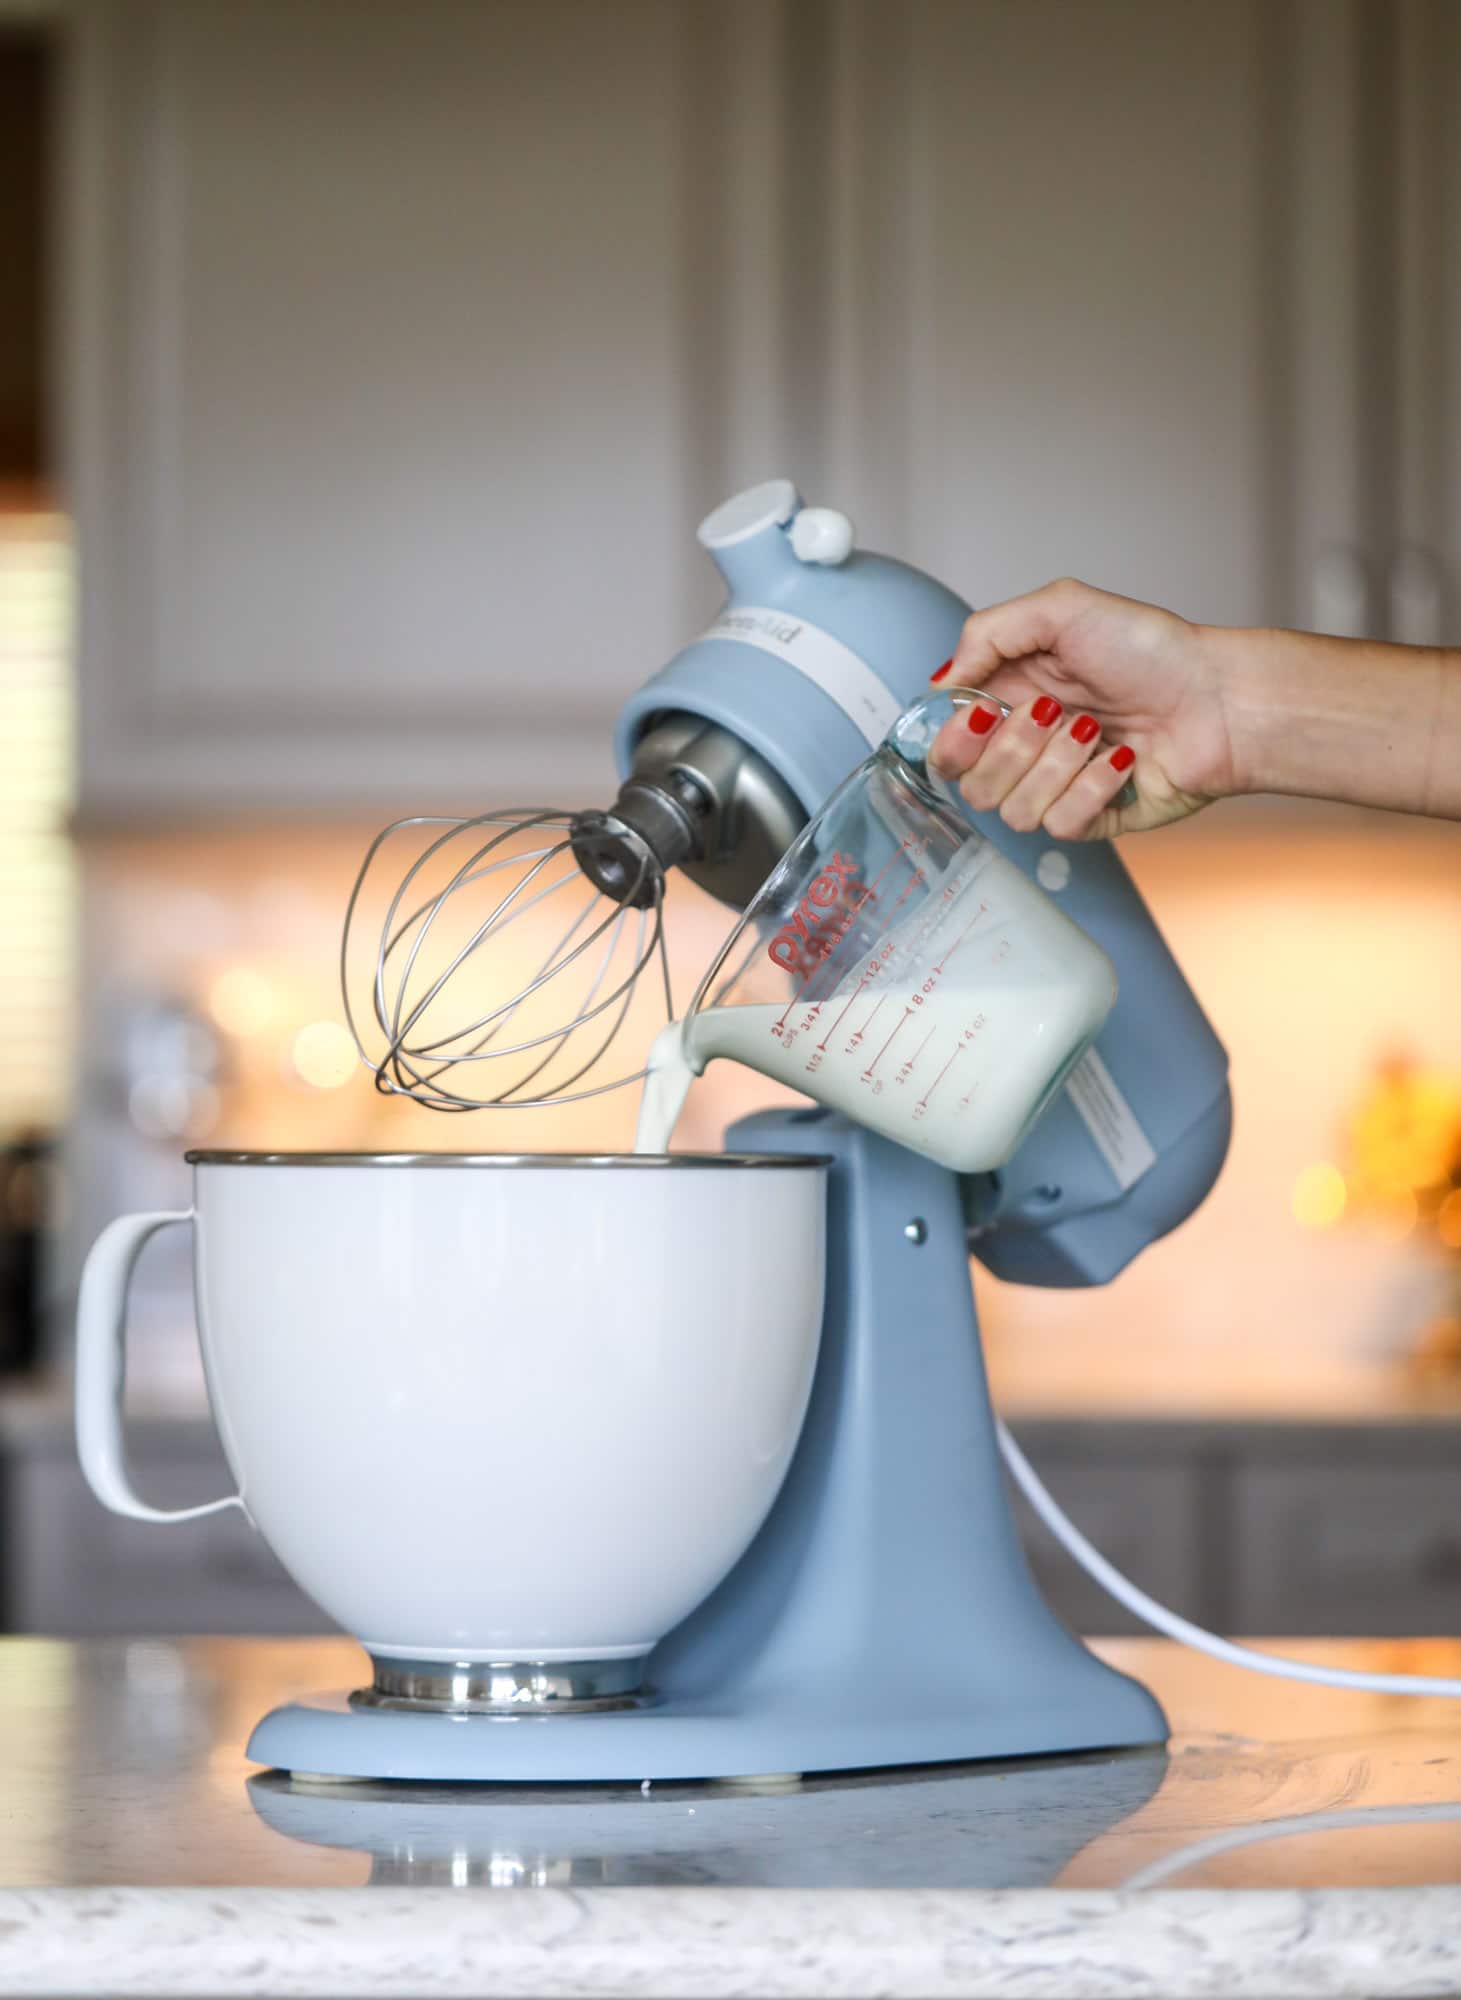 14 Of The Most Useful Kitchen Tools That People Swear By